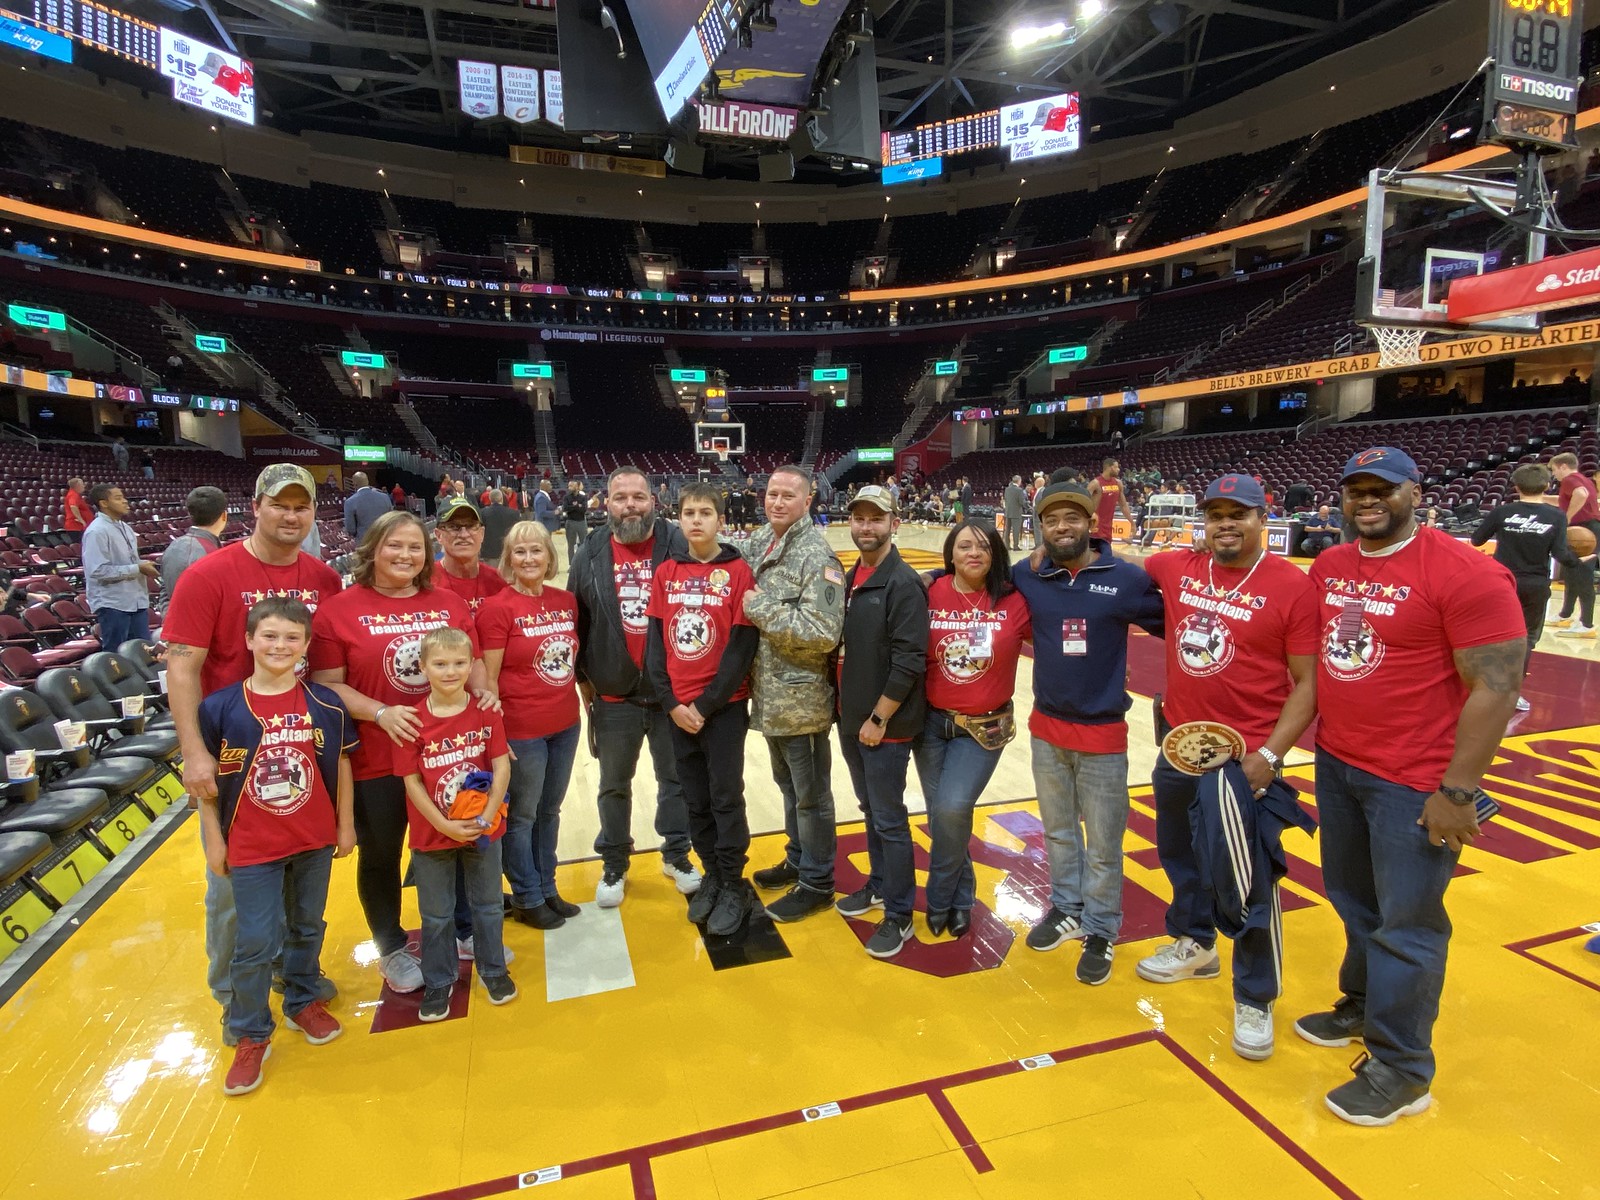 2019_T4T_Cleveland Cavaliers Hoops for Troops 11